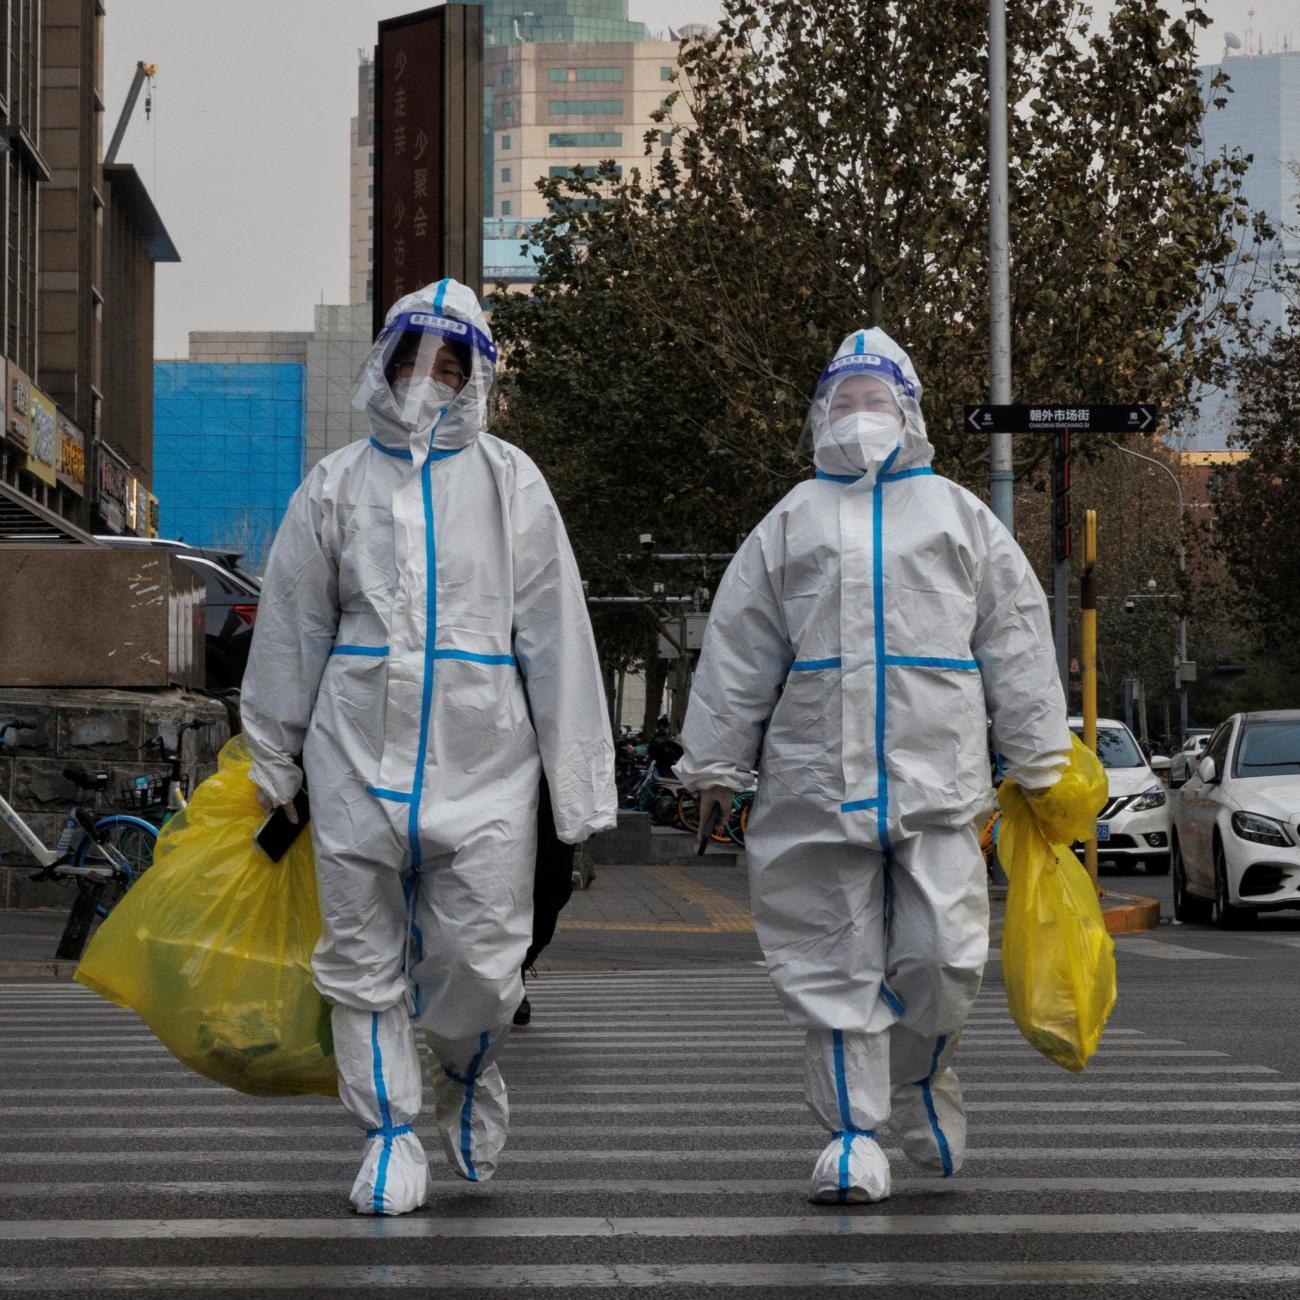 Pandemic prevention workers in protective suits cross a street as COVID-19 outbreaks continue.